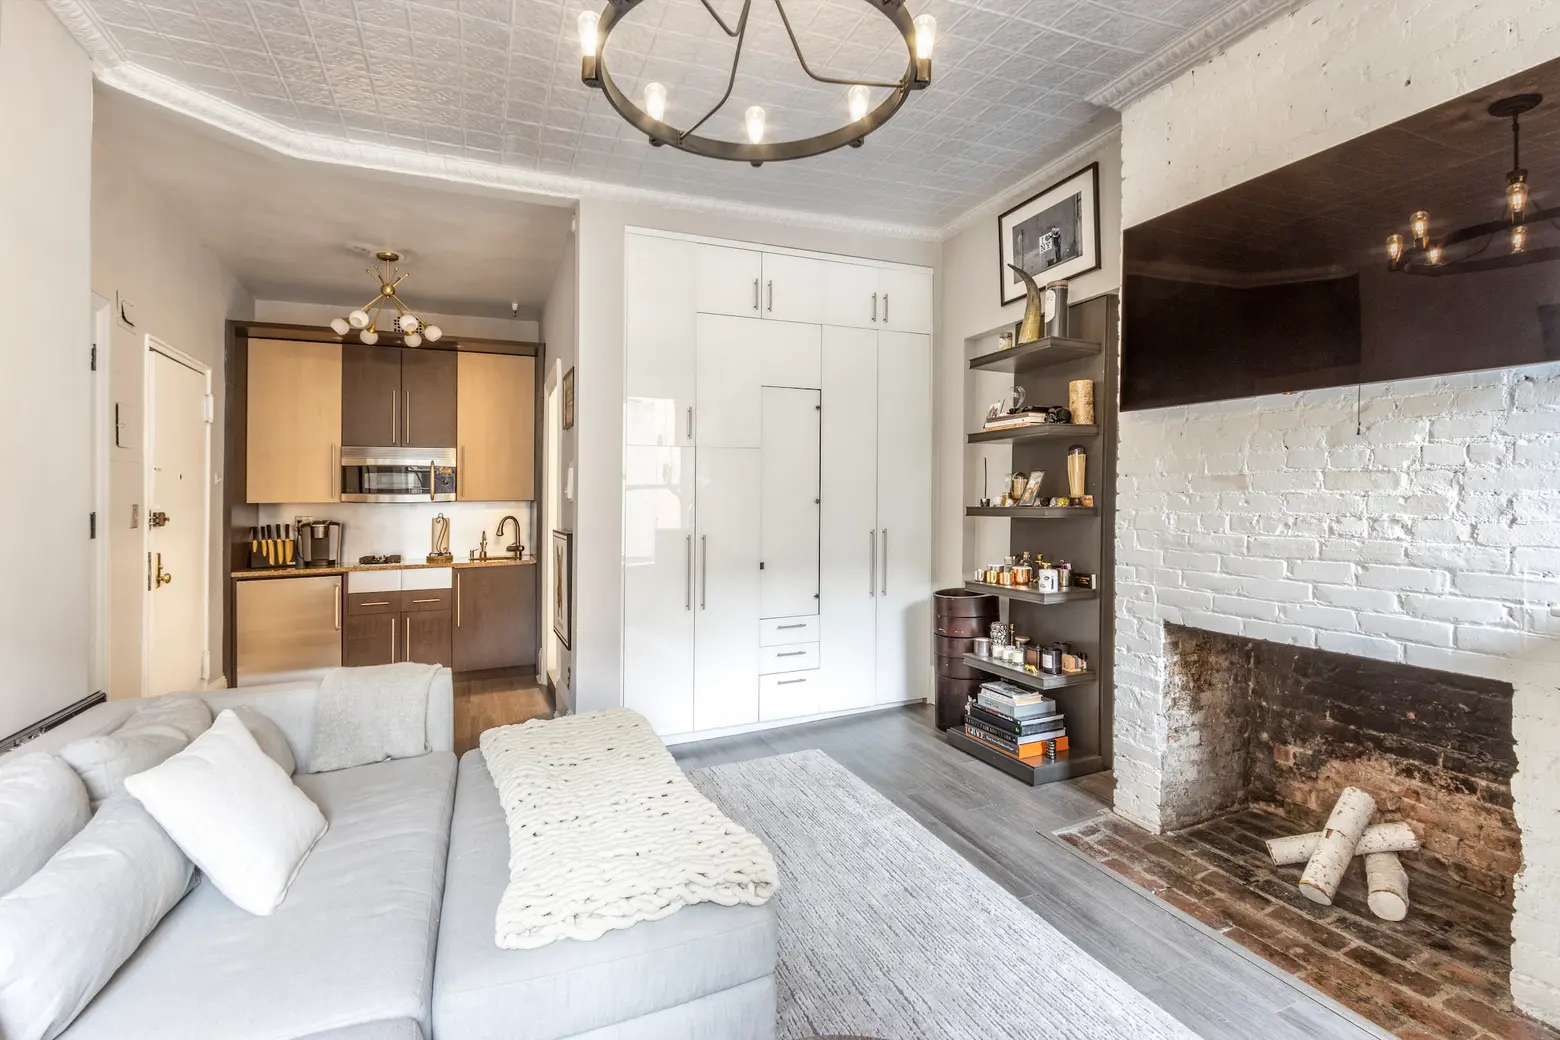 For $750K, this petite one-bedroom in the West Village feels like an urban cabin